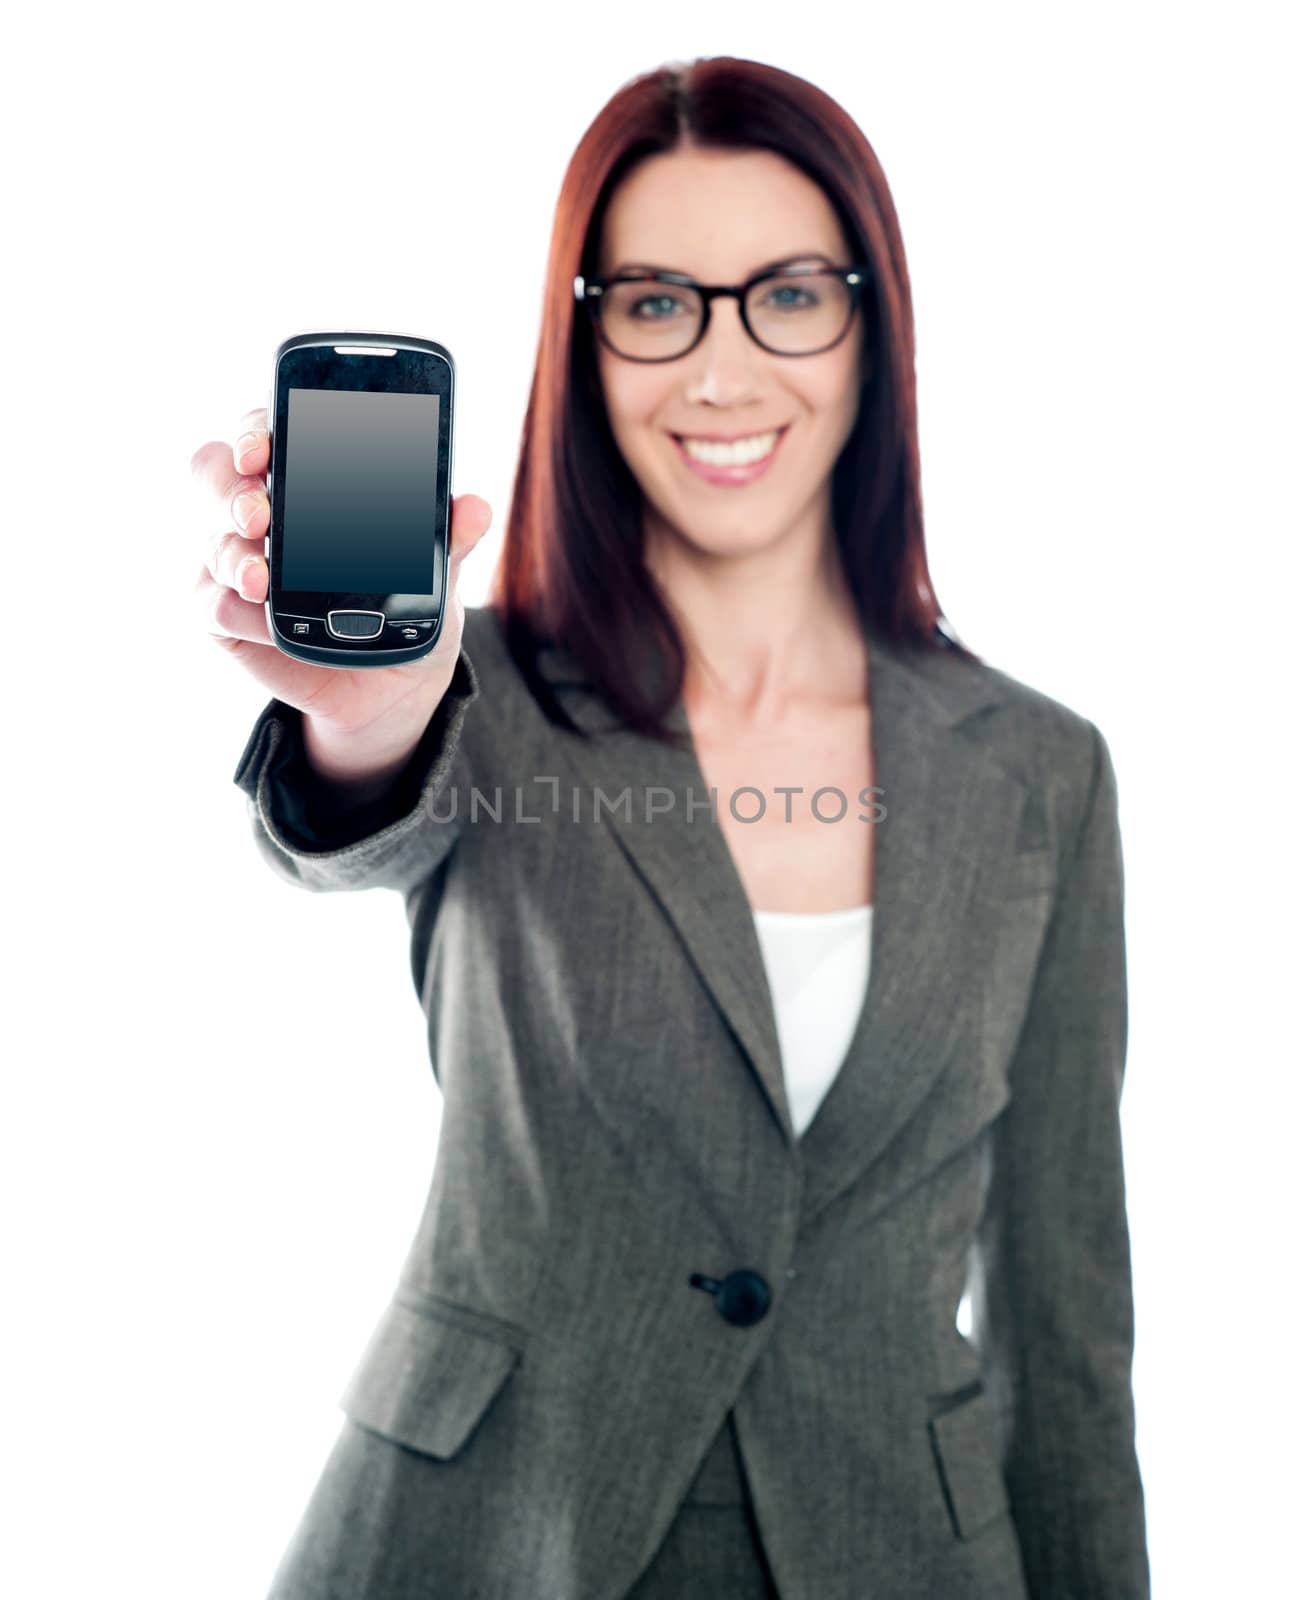 Saleswoman displaying latest mobile handset. Touch screen technology